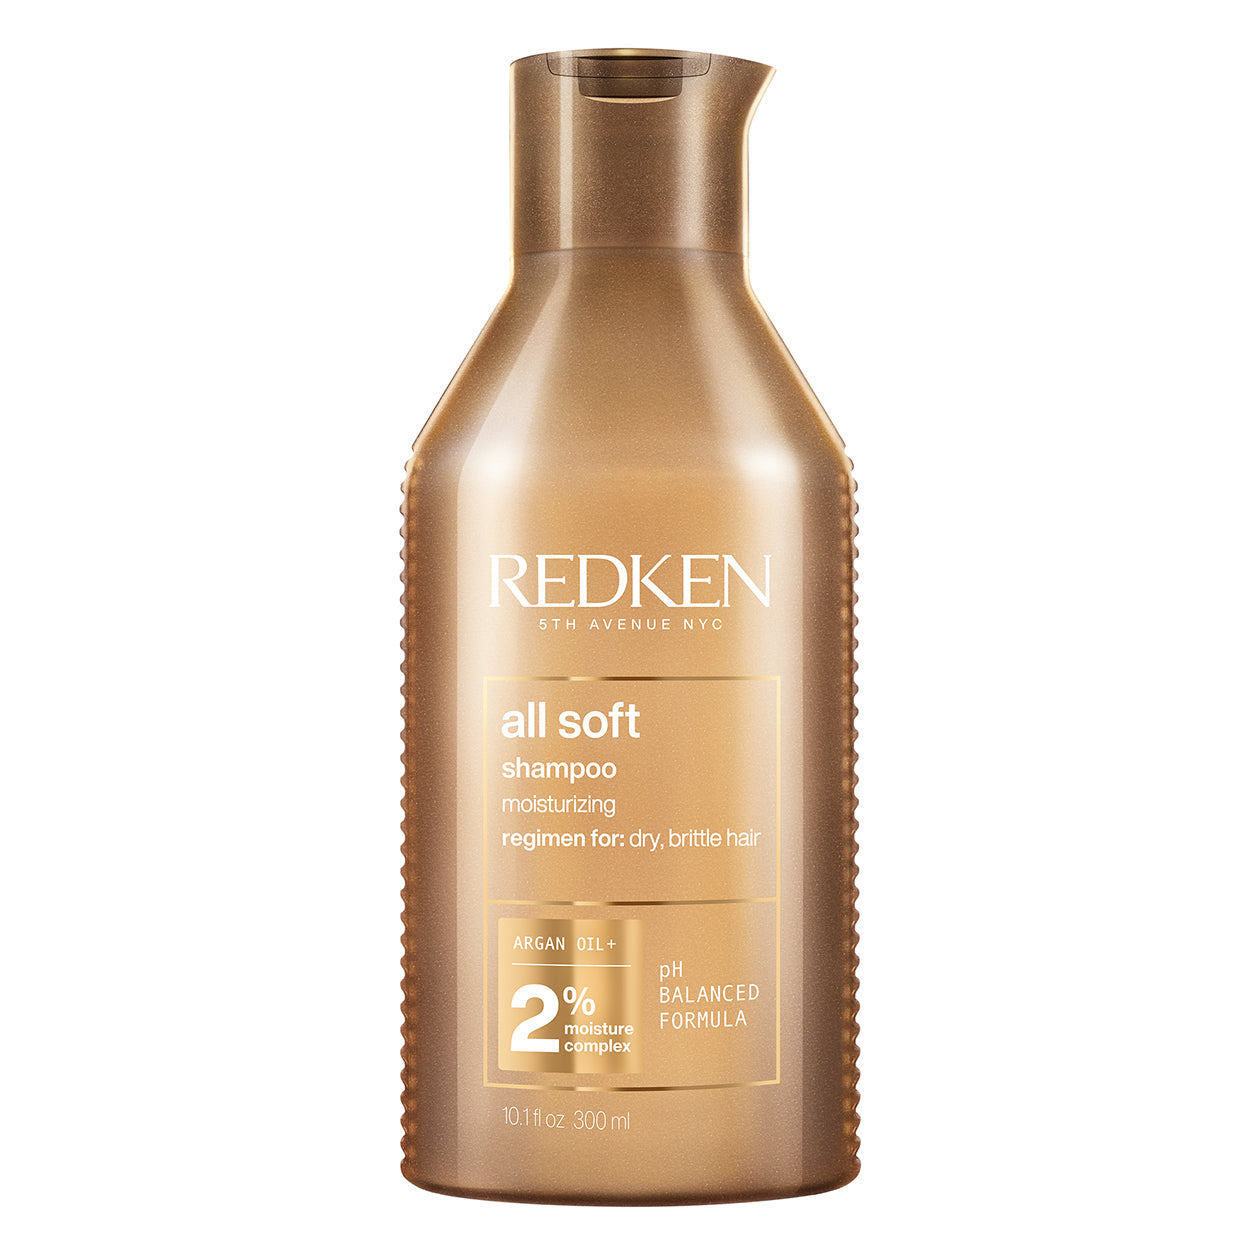 Redken All Soft Shampoo 10.1oz / 300ml - Redken Hair Products for Instant Hair Moisturizes, Add & Silkness, Leaves Hair Soft and Manageable